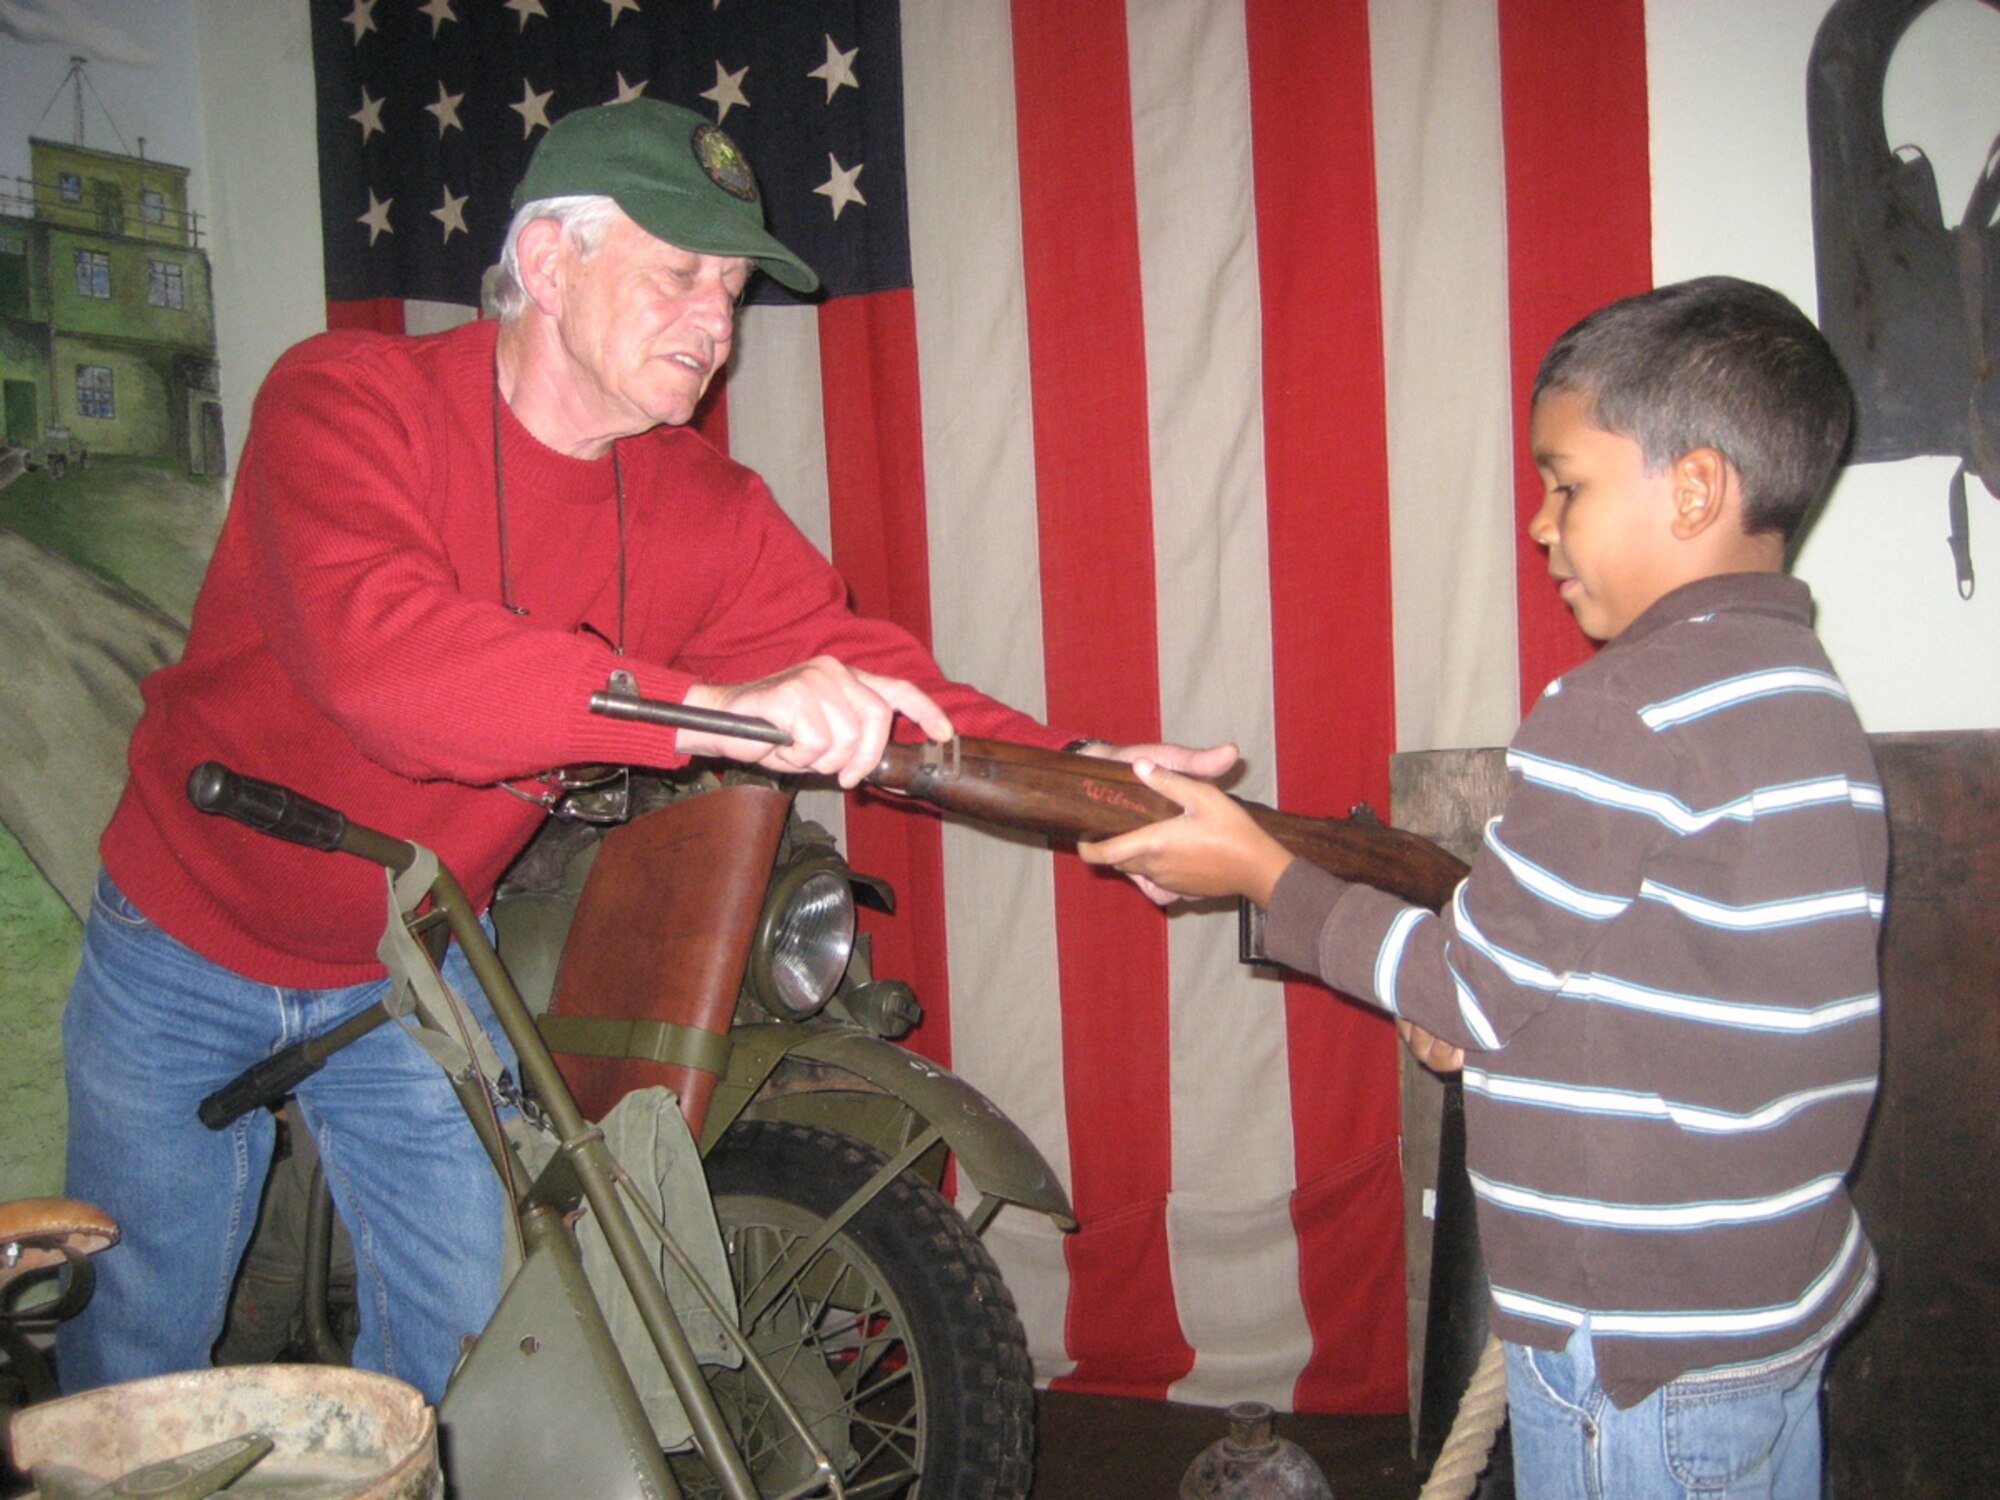 SPANGDAHLEM AIR BASE GERMANY -- Roger Feller, who owns and operates the 385th Bomb Group Museum in Perle, Luxembourg, shows Nolan Raybon, 7, son of Staff Sgt. Terrence Raybon, 52nd Mission Support Squadron, an M-1 Carbine rifle during a visit July 5, 2007. Several people from Spangdahlem AB visited the museum as part of a trip sponsored by the European Military History Group that day. (U.S. Air Force photo/Staff Sgt. Andrea Knudson)